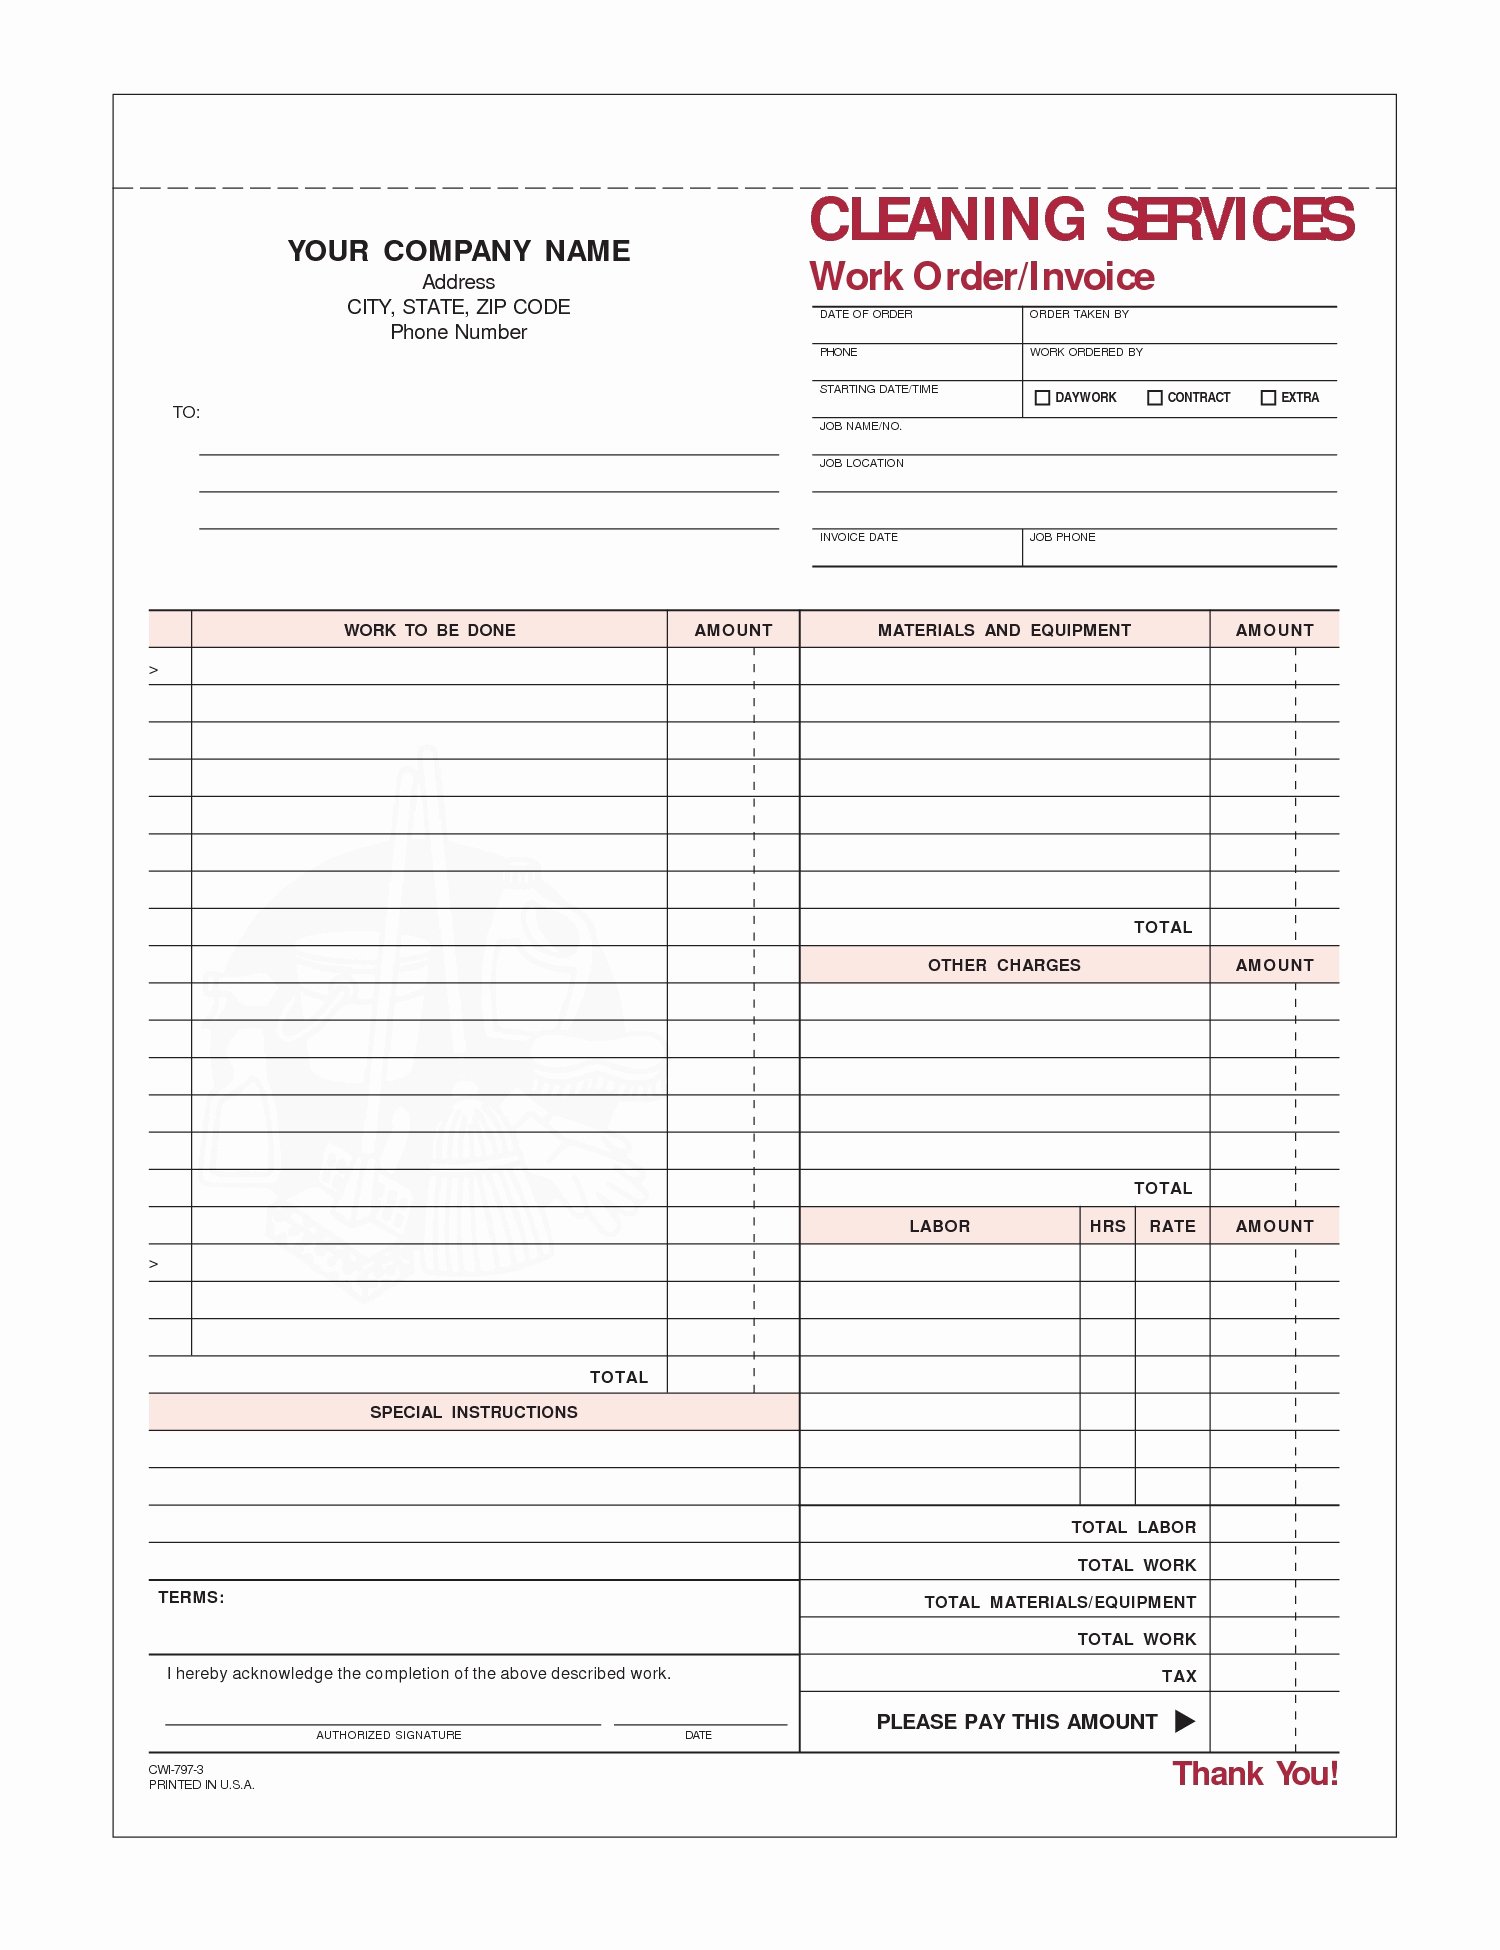 Cleaning Service Invoice Template Luxury Cleaning Service Invoice Invoice Template Ideas